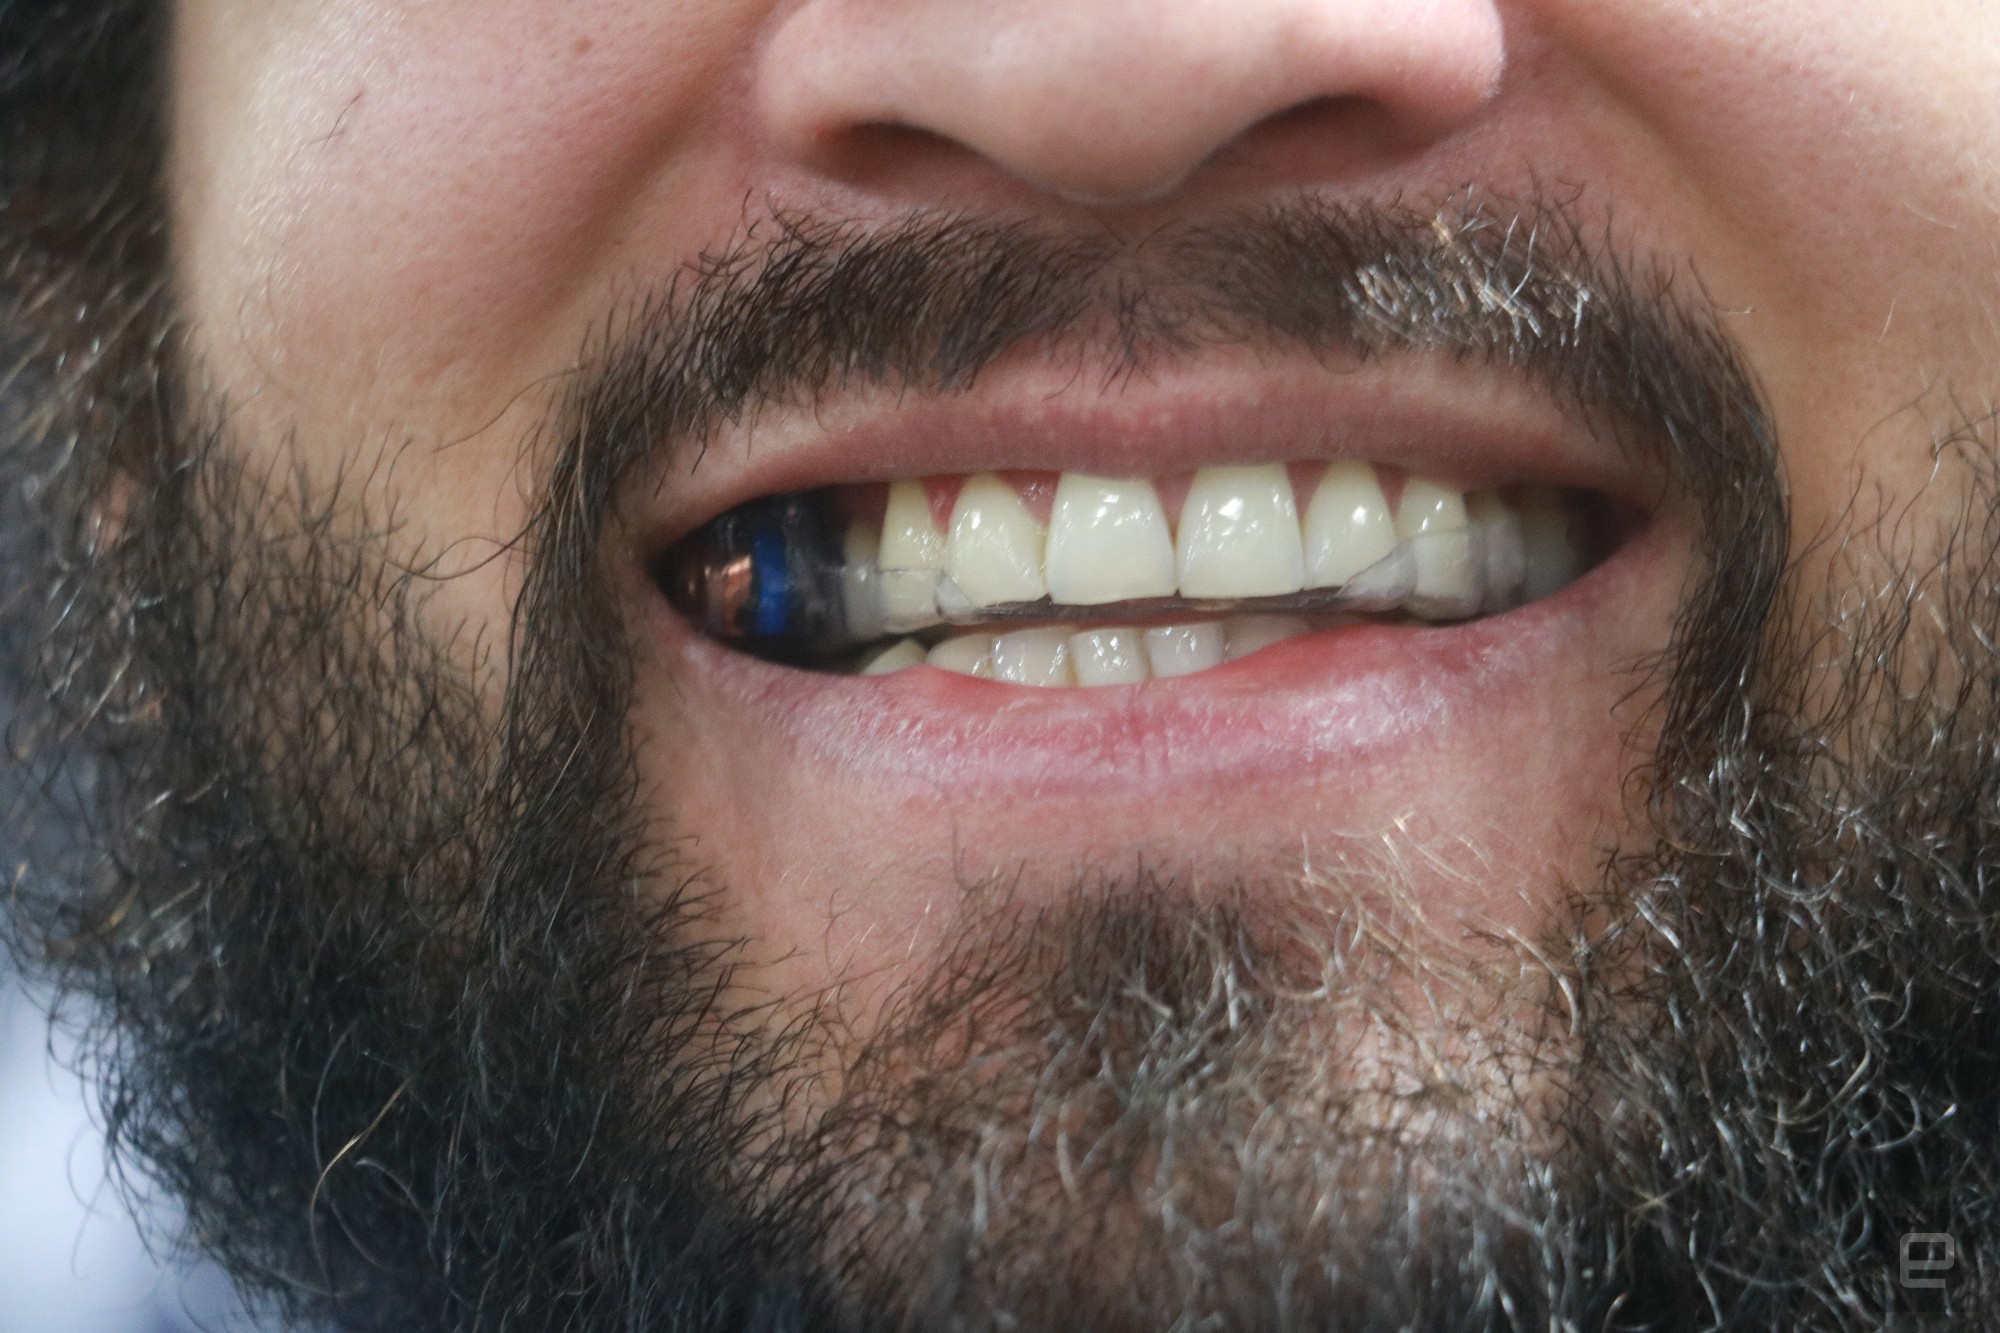 Close-up of a person's smile using the MouthPad 2024. Some lines indicate that the person has a clear tray over their teeth, while a small piece of equipment is on top of a tooth on the right side of the mouth.